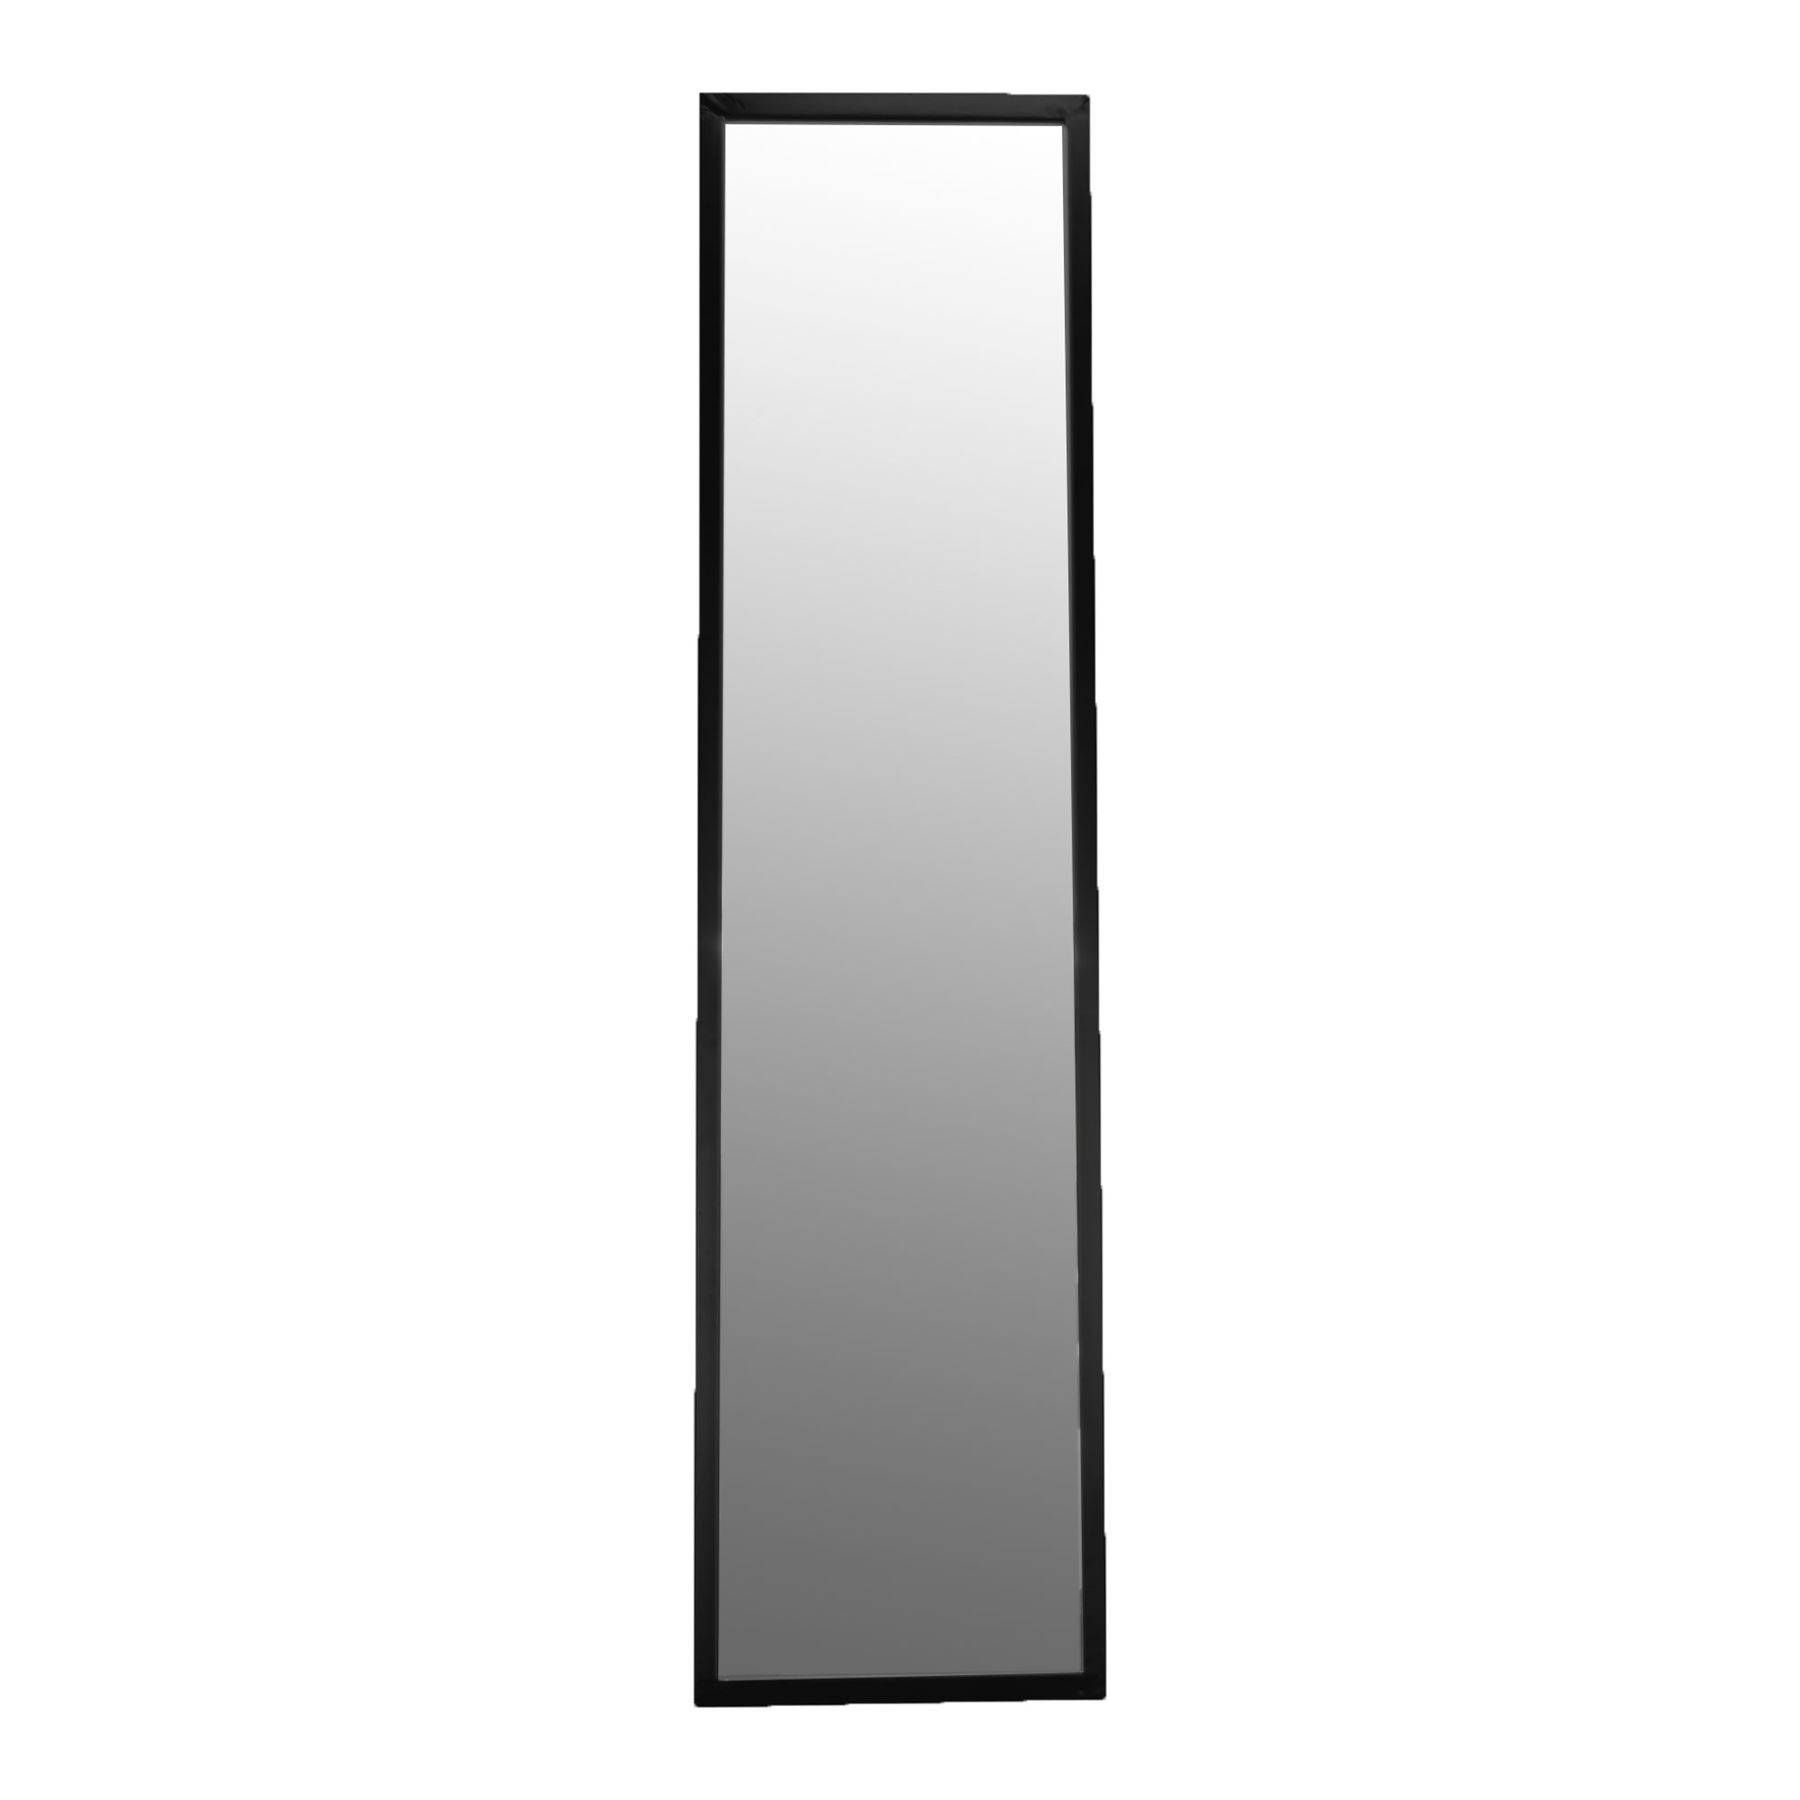 Free Standing Full Length Tilting Dressing Floor Bedroom Mirror Intended For Free Standing Black Mirrors (View 12 of 15)